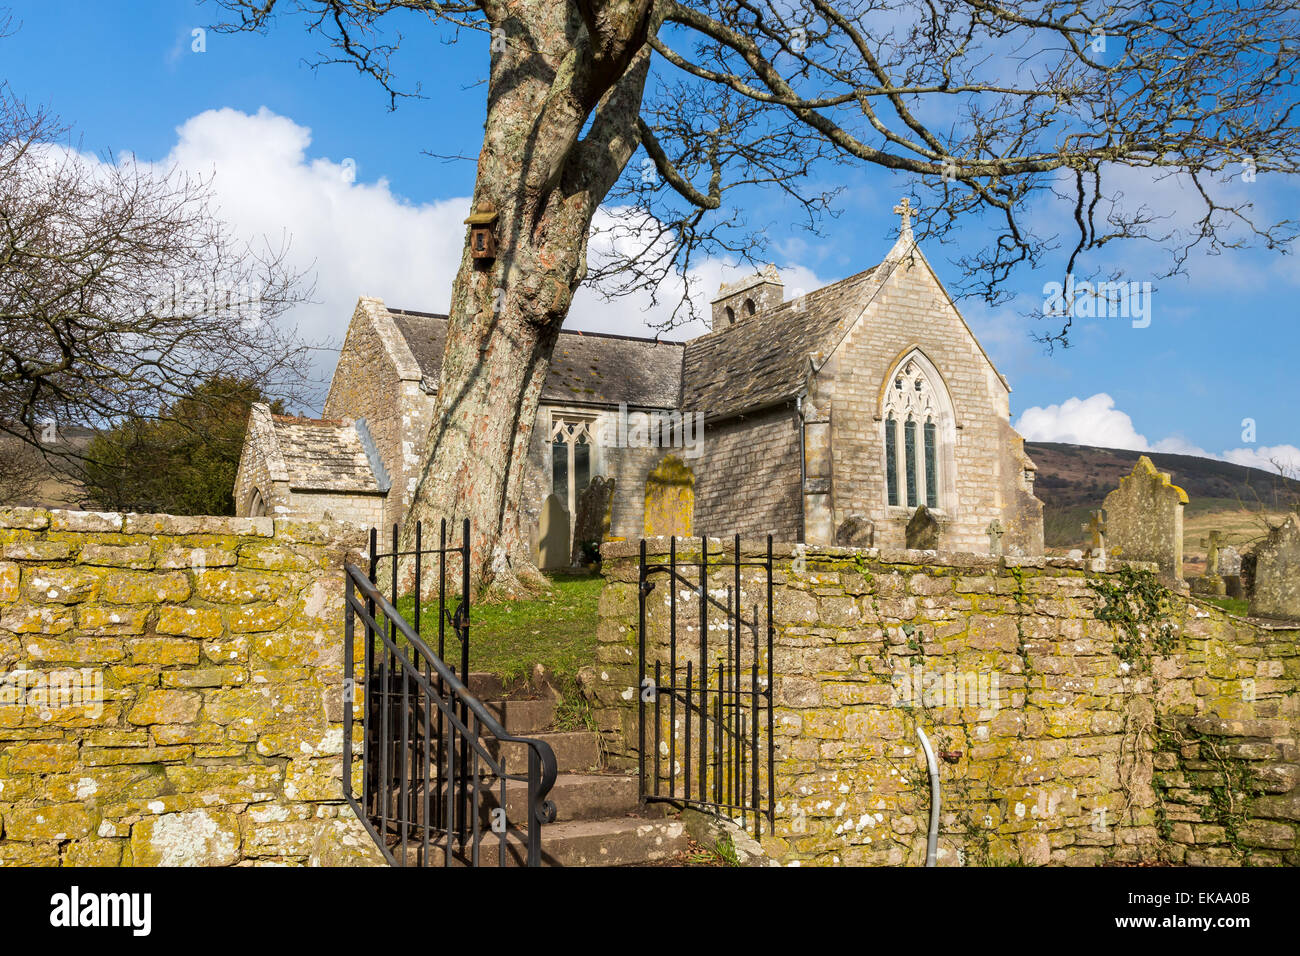 St. Mary's church Church at Tyneham a ghost village in South Dorset, England,on the Isle of Purbeck Stock Photo